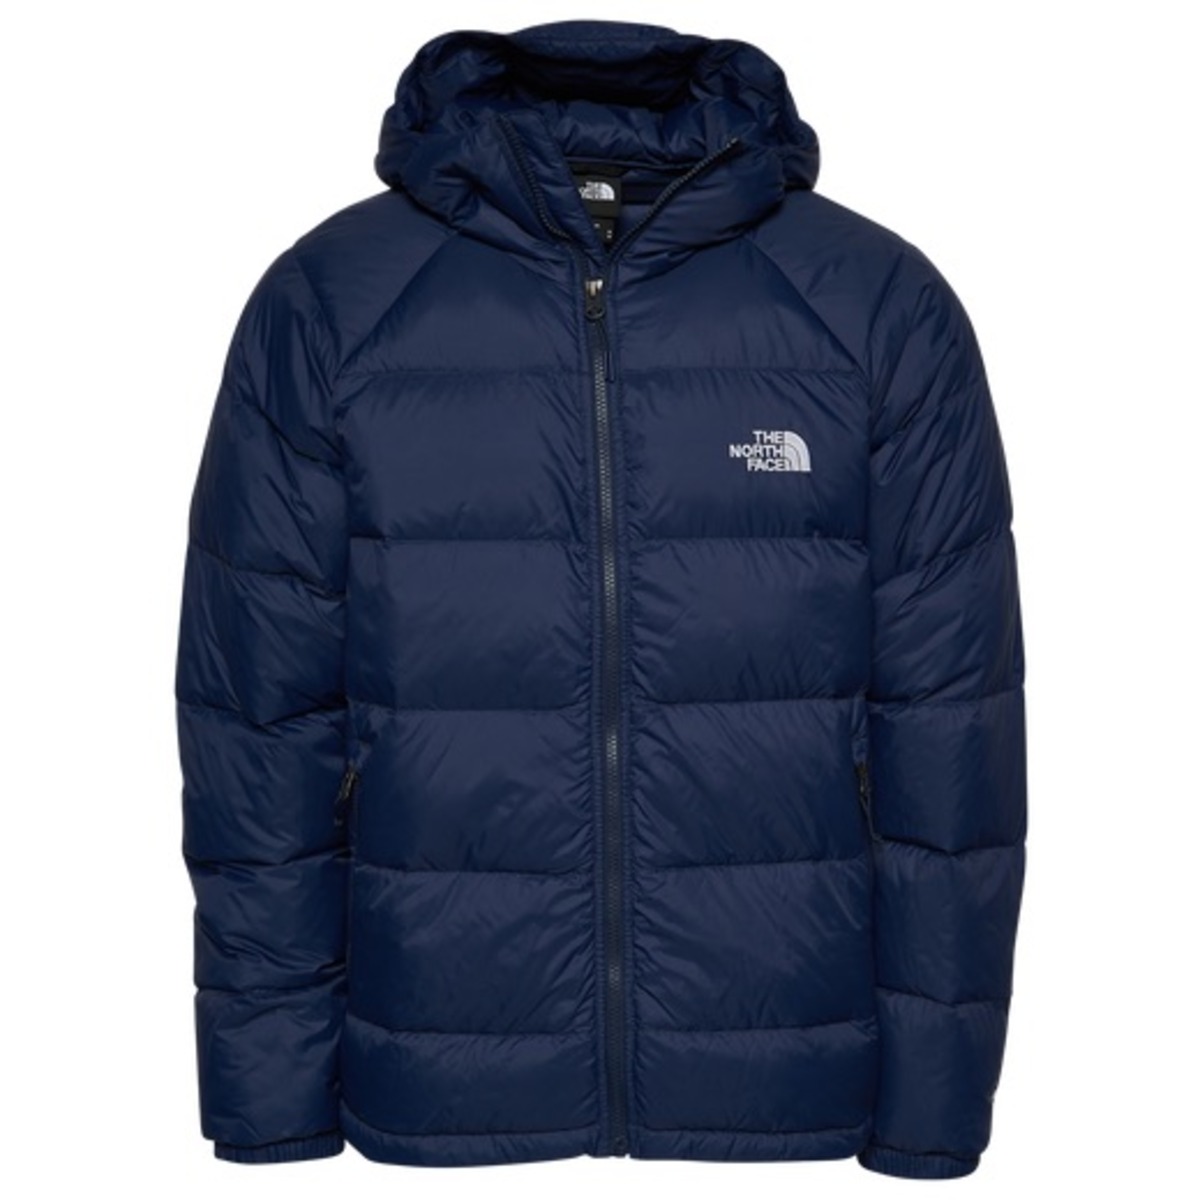 THE NORTH FACE ザ・ノースフェイス メンズ Hydrenalite Down Jacket